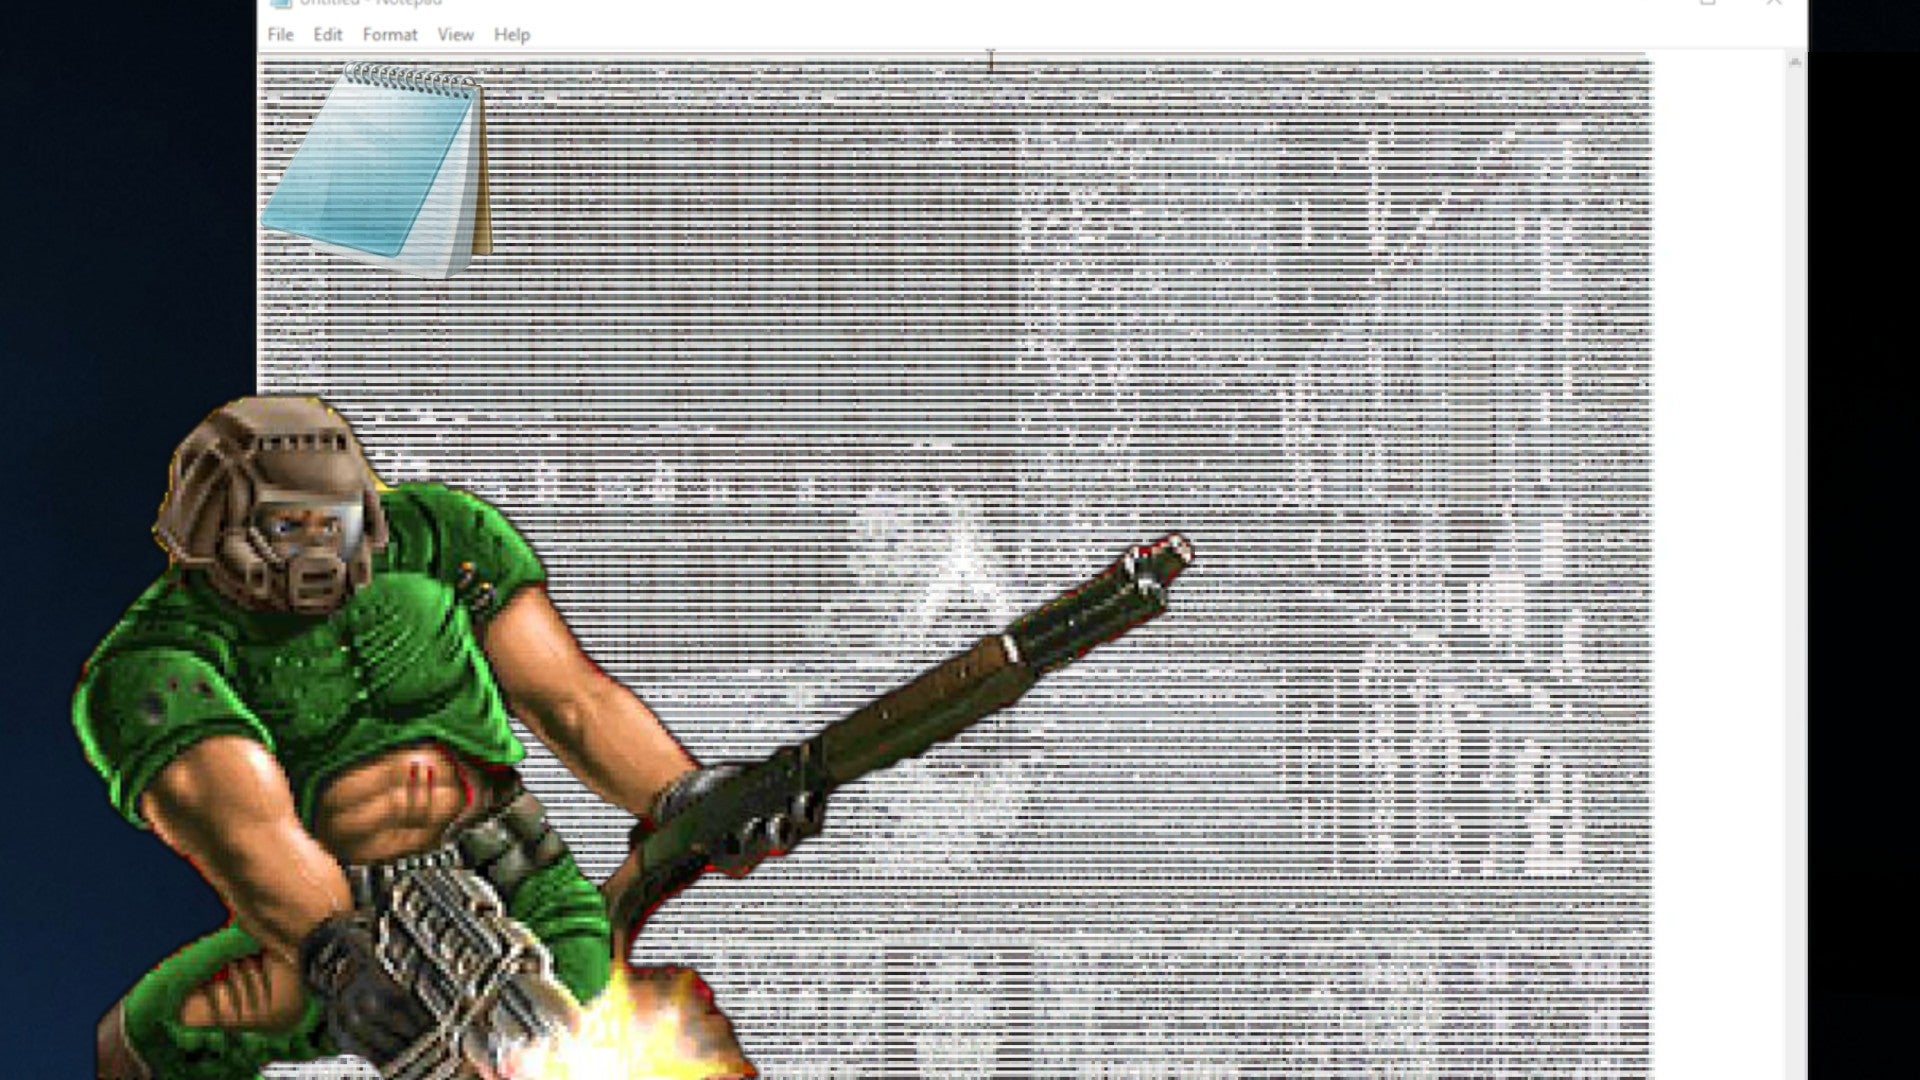 DOOMpad is a version of id Software's classic FPS Doom mirrored in Windows Notepad.